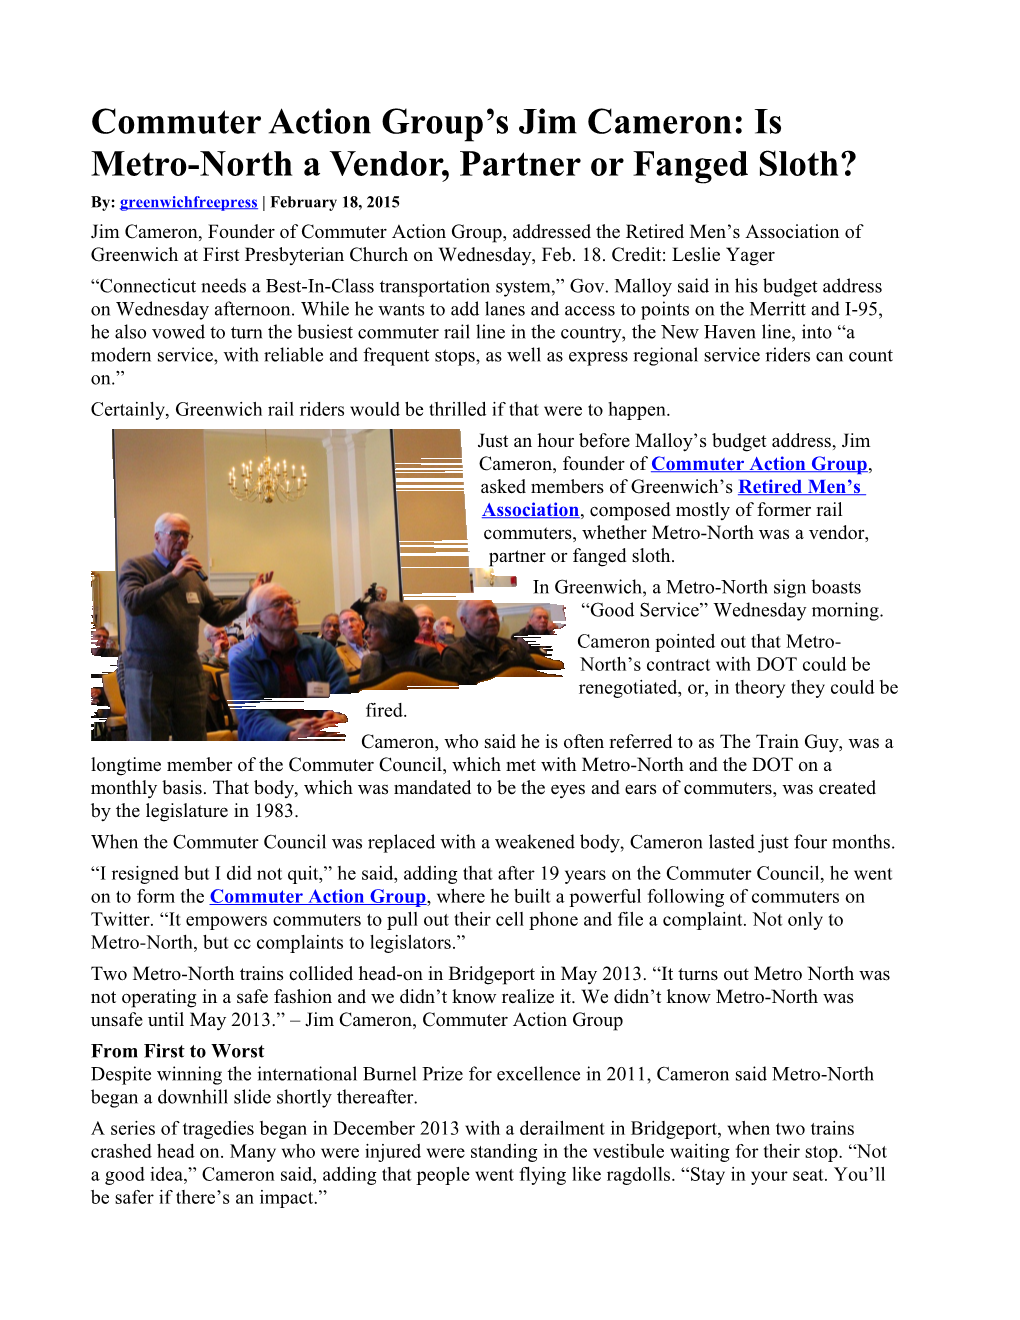 Commuter Action Group S Jim Cameron: Is Metro-North a Vendor, Partner Or Fanged Sloth?